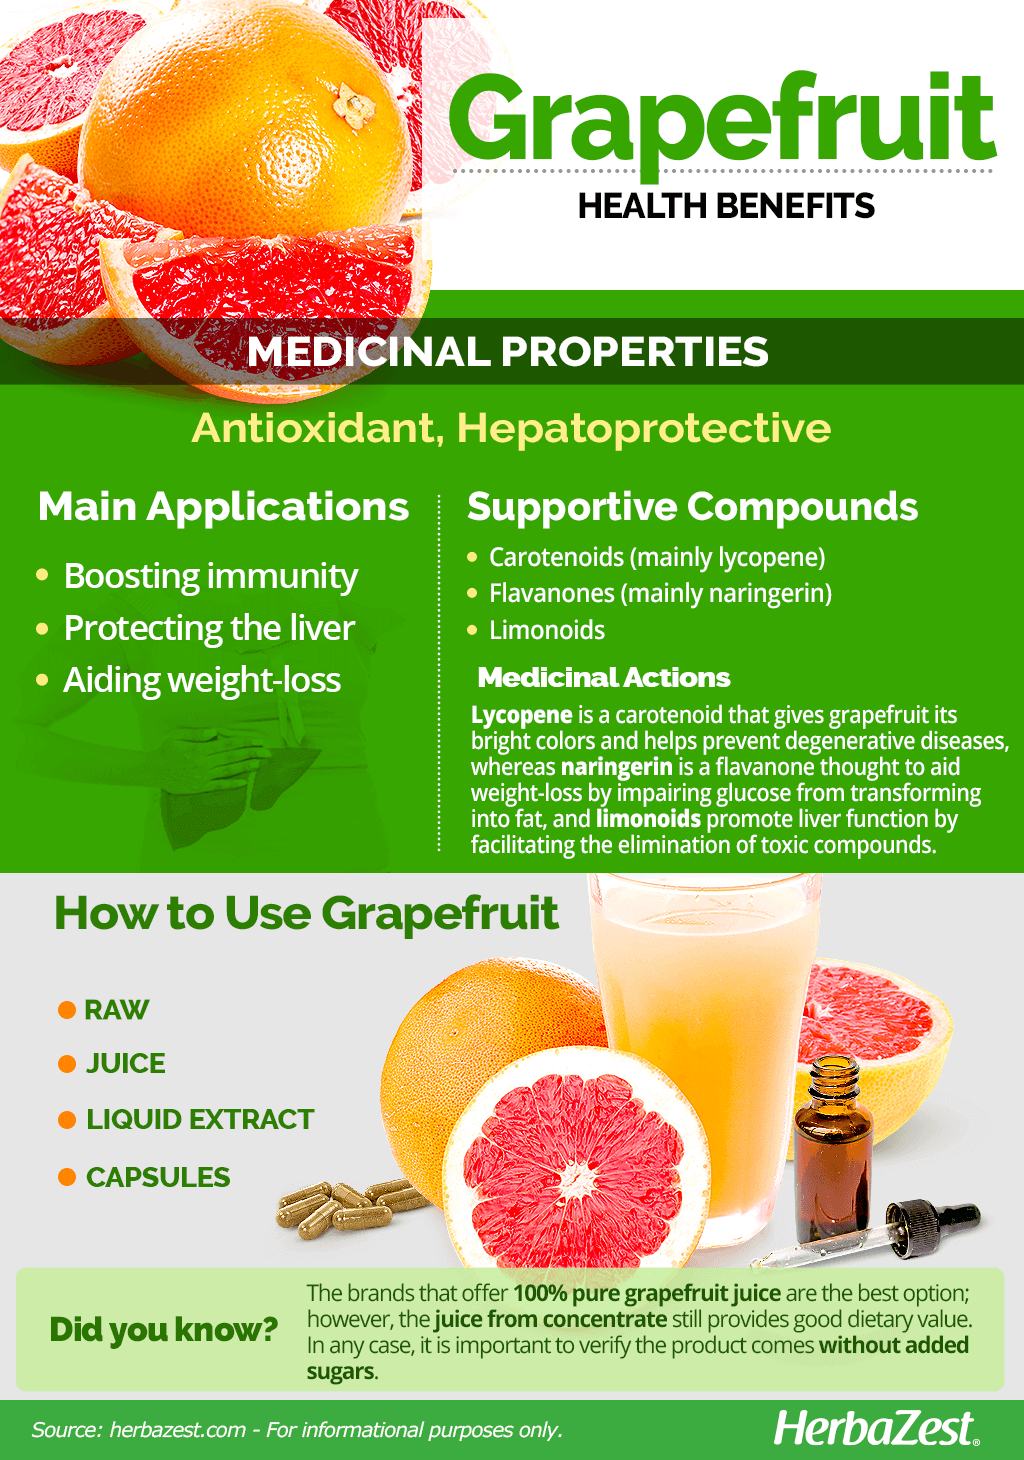 Grapefruit Benefits, Nutrition Facts and How to Eat - Dr. Axe